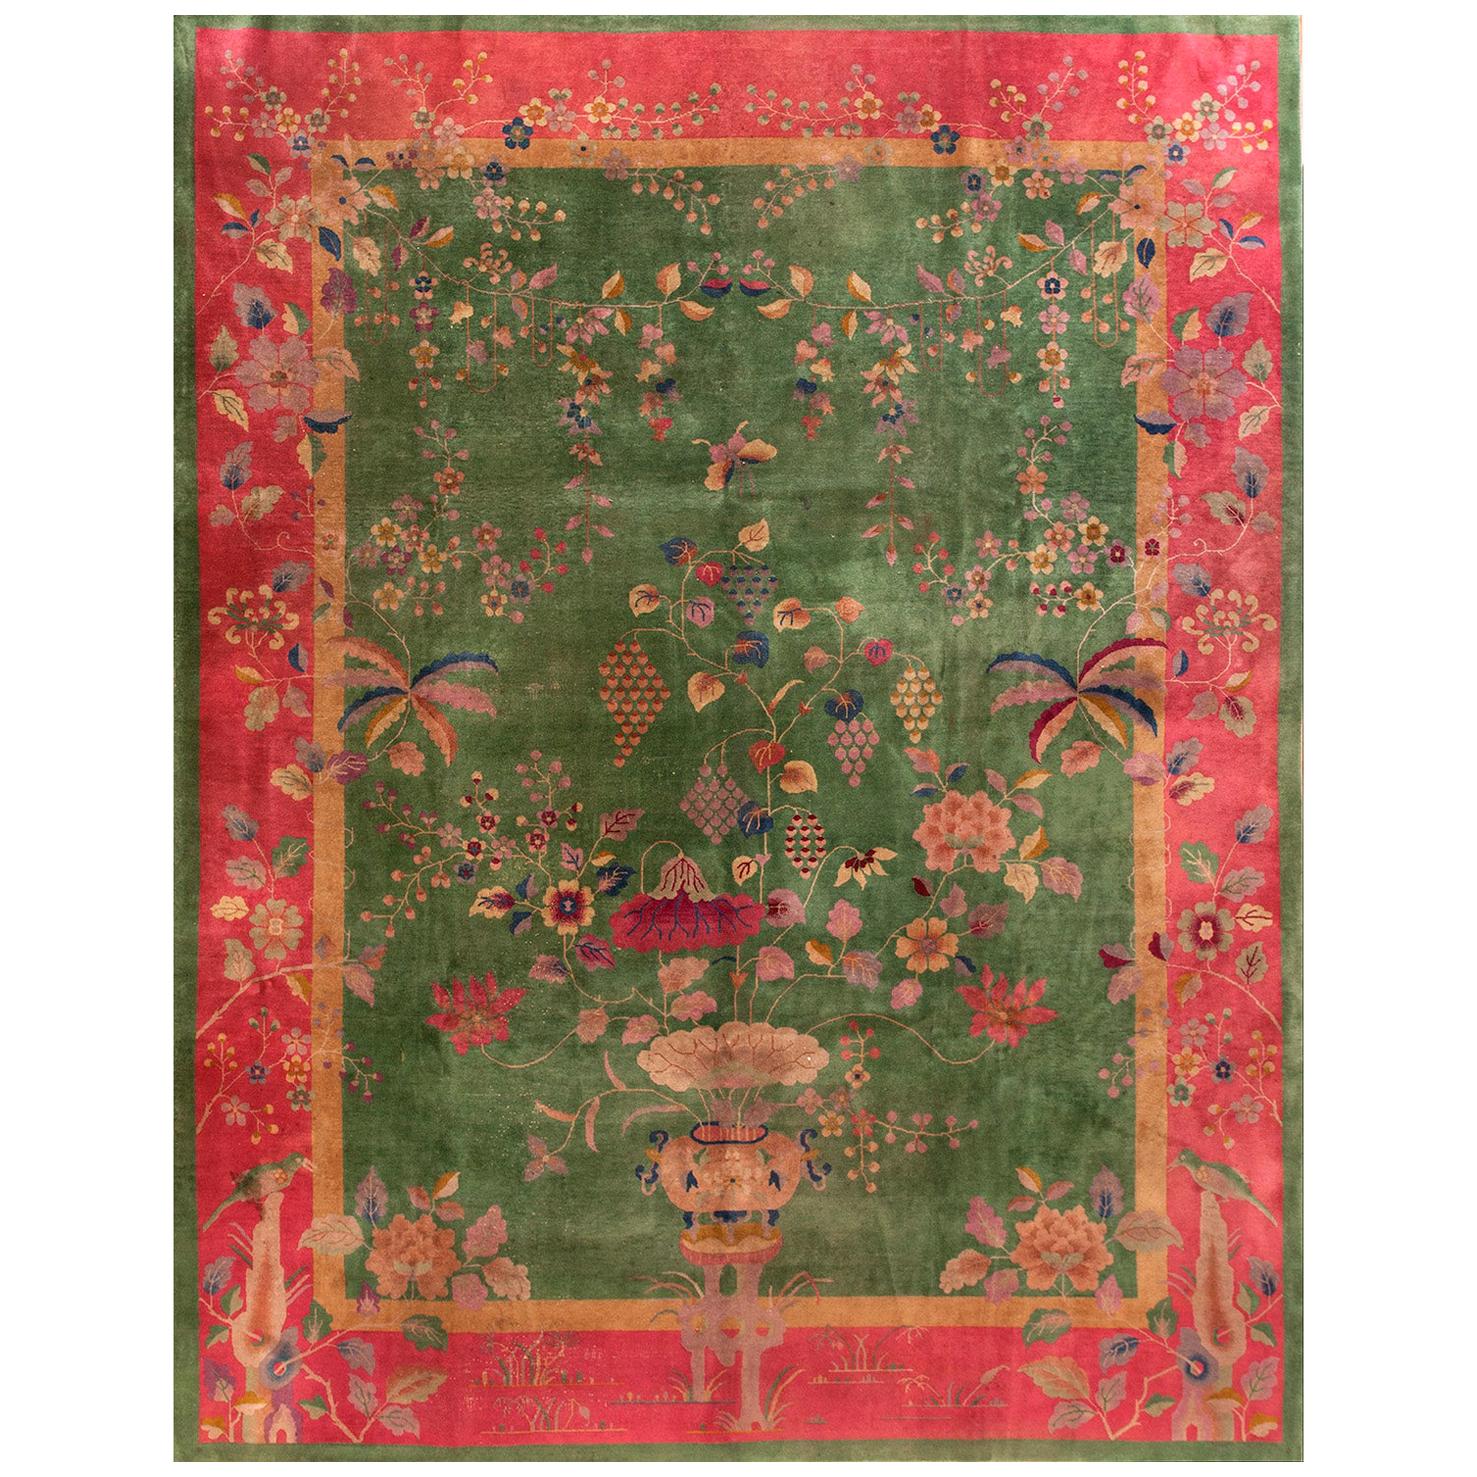 1920s Chinese Art Deco Carpet ( 8'10" x 11'6" - 270 x 350 ) For Sale